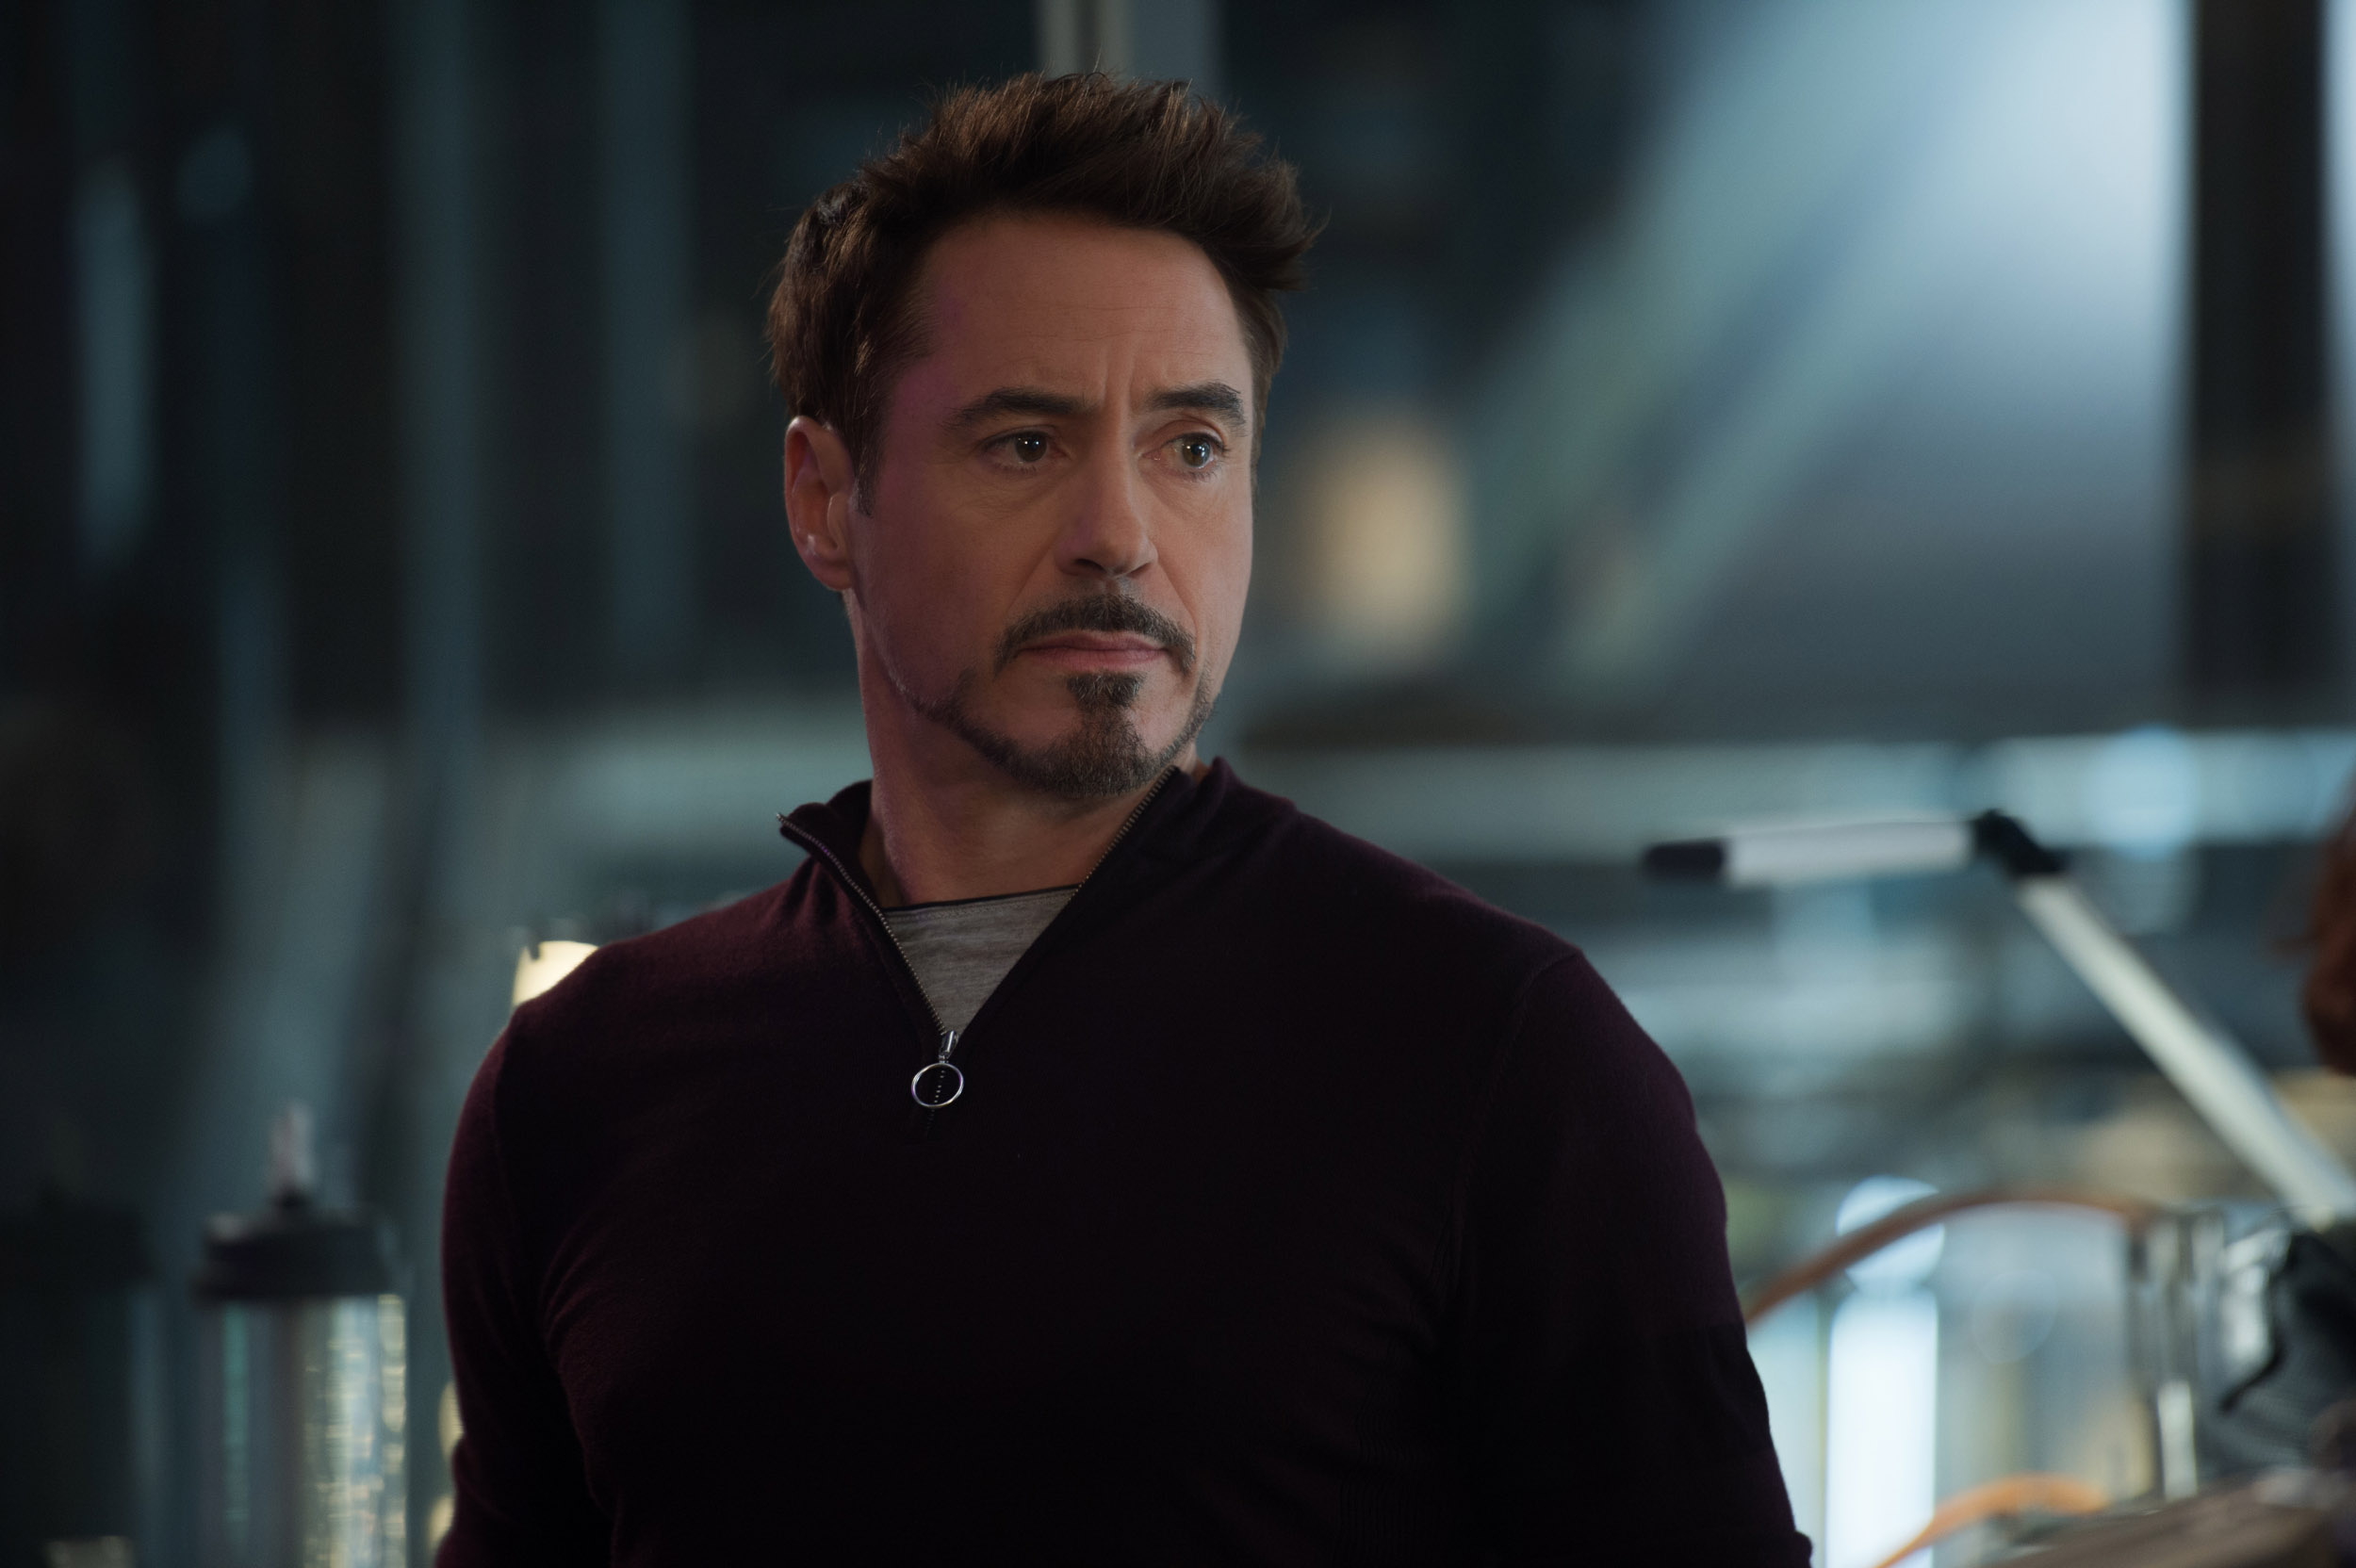 Robert Downey Jr.: American actor, producer, and musician best known today for playing Iron Man. 2500x1670 HD Background.